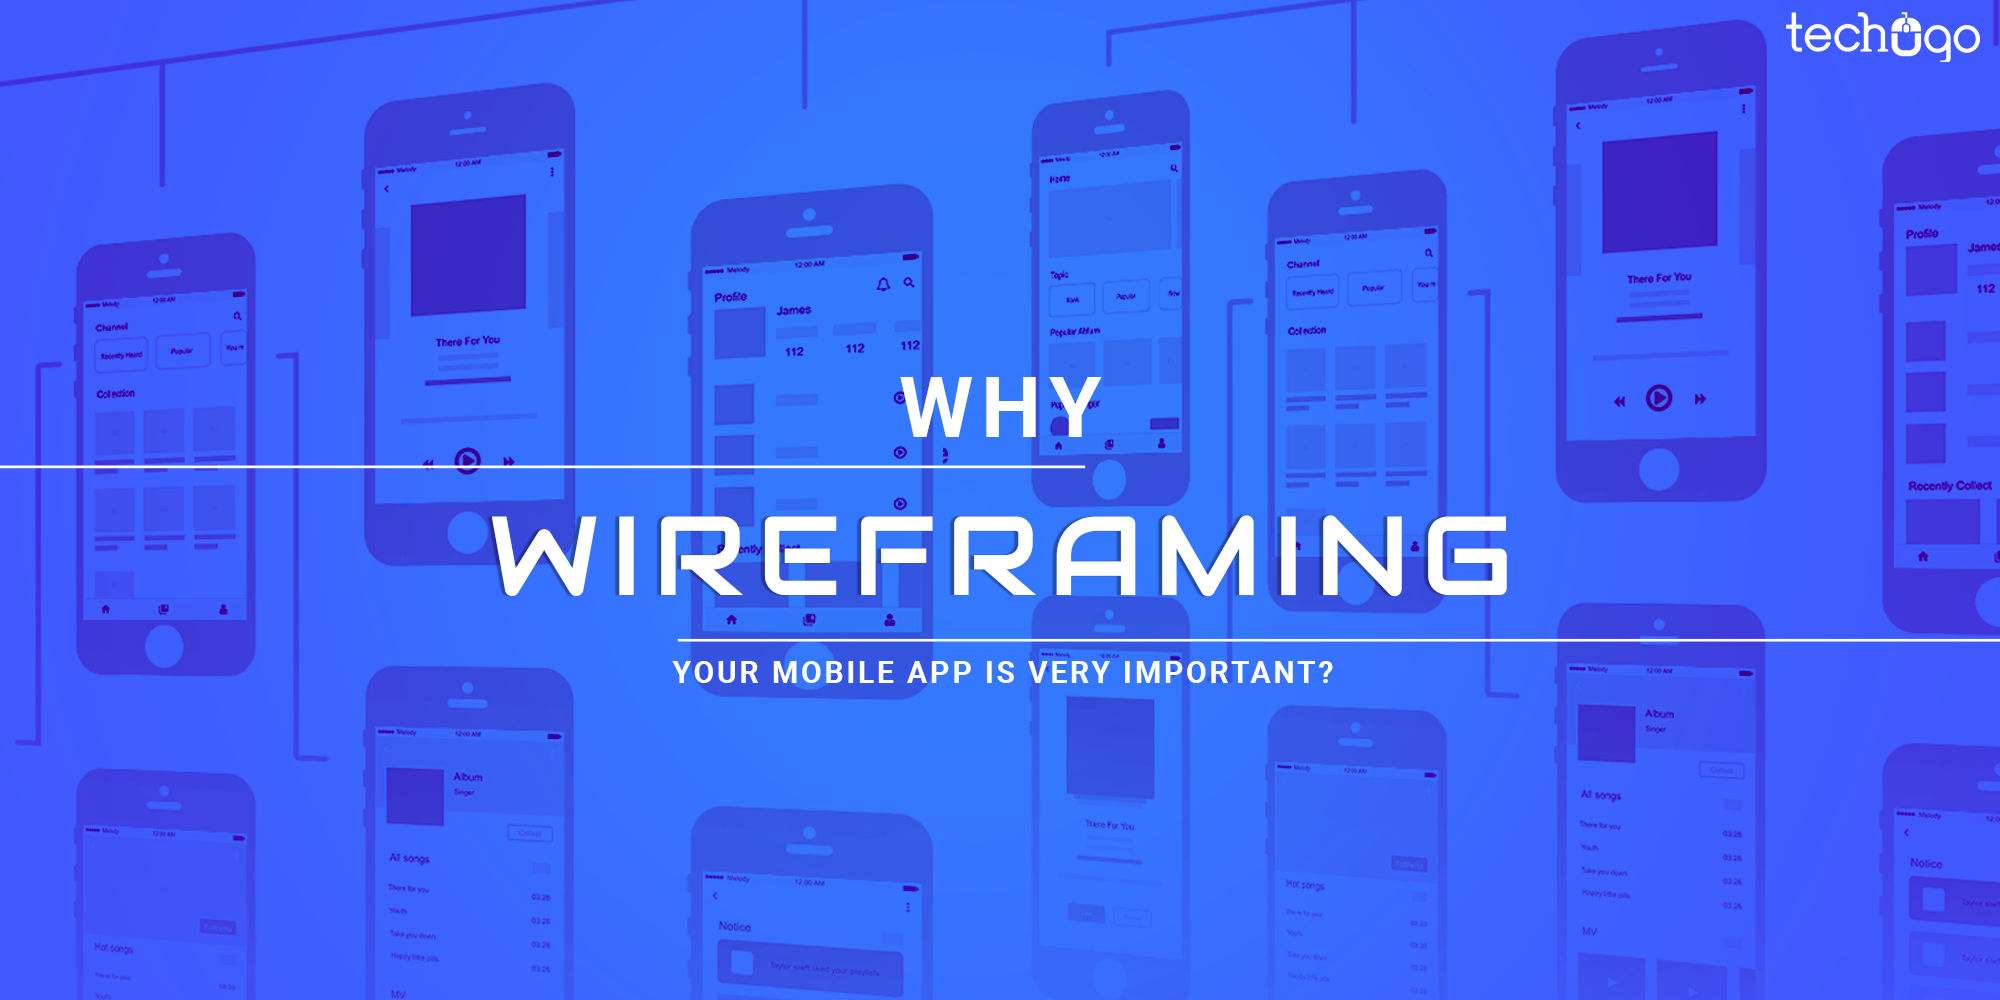 Why Wireframing Your Mobile App Is Very Important